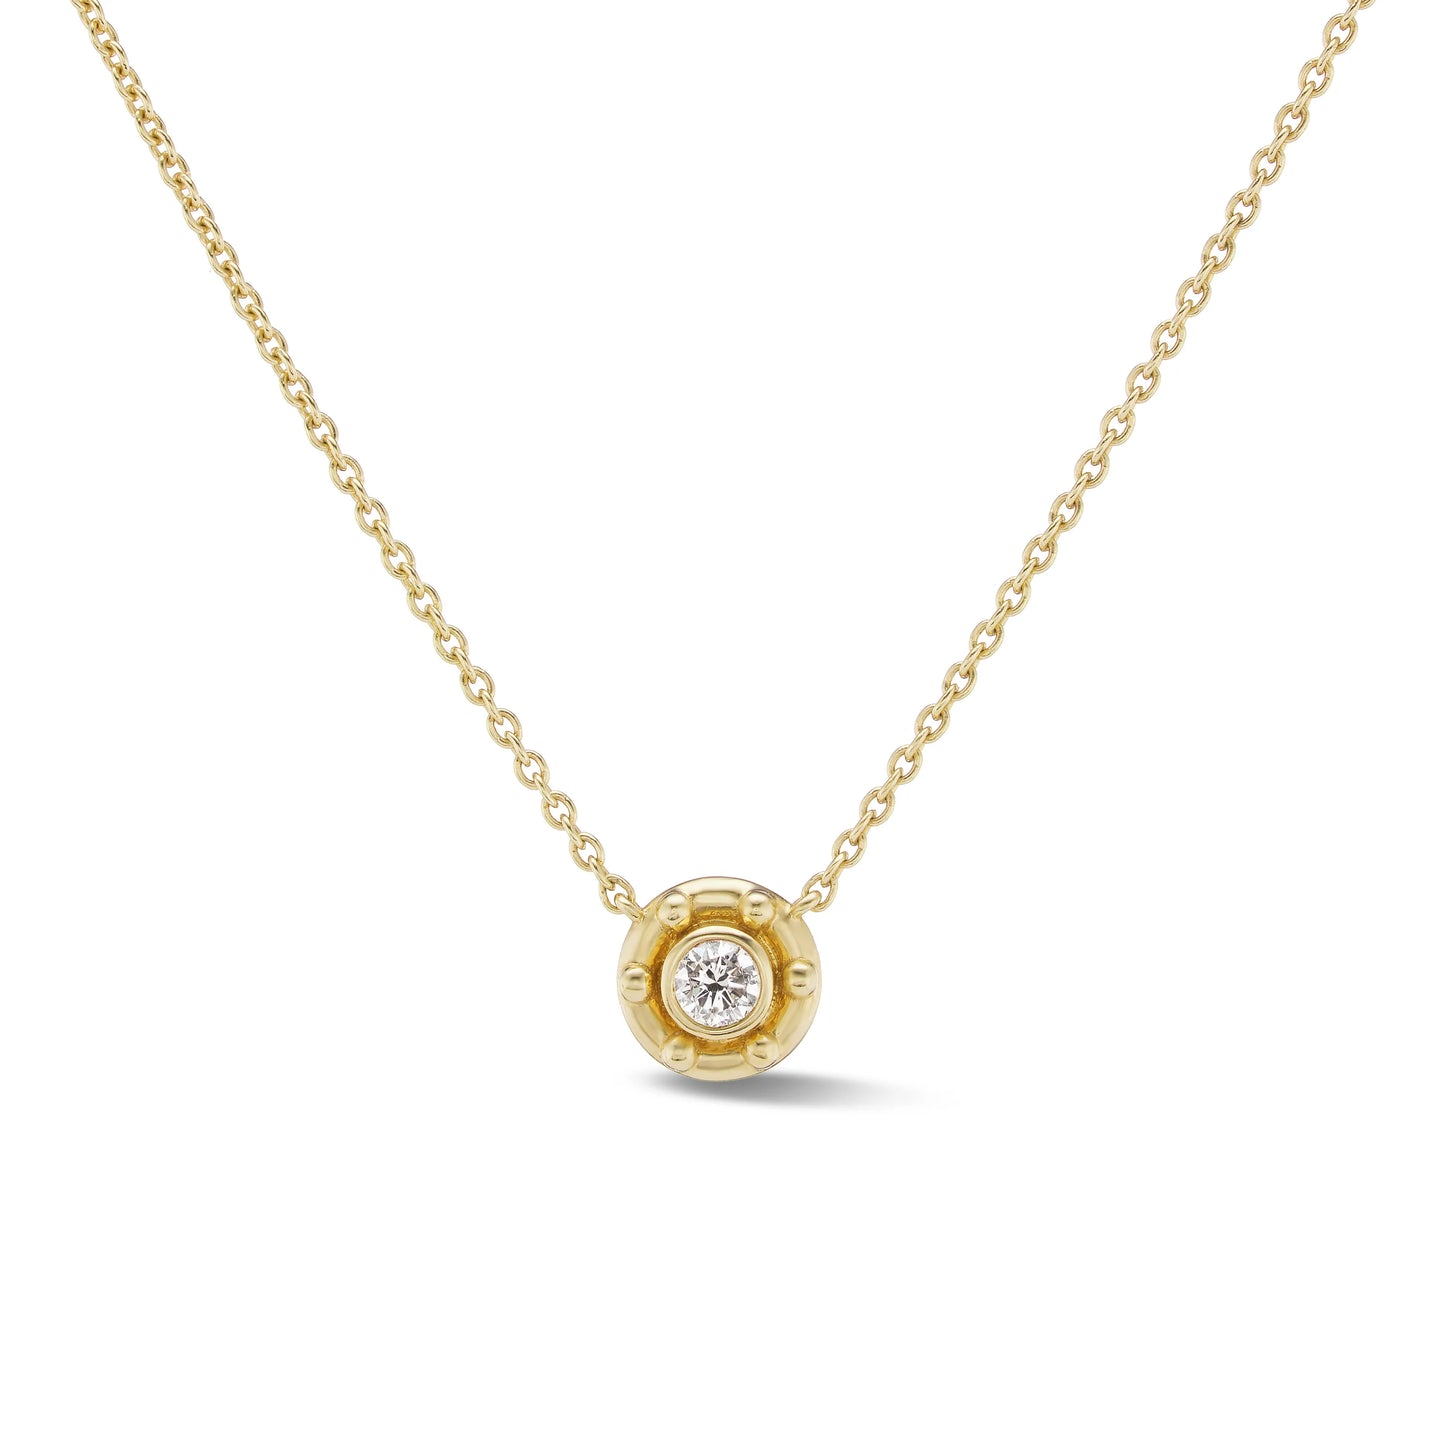 Emily Weld Collins Aurifex Necklace in Diamond